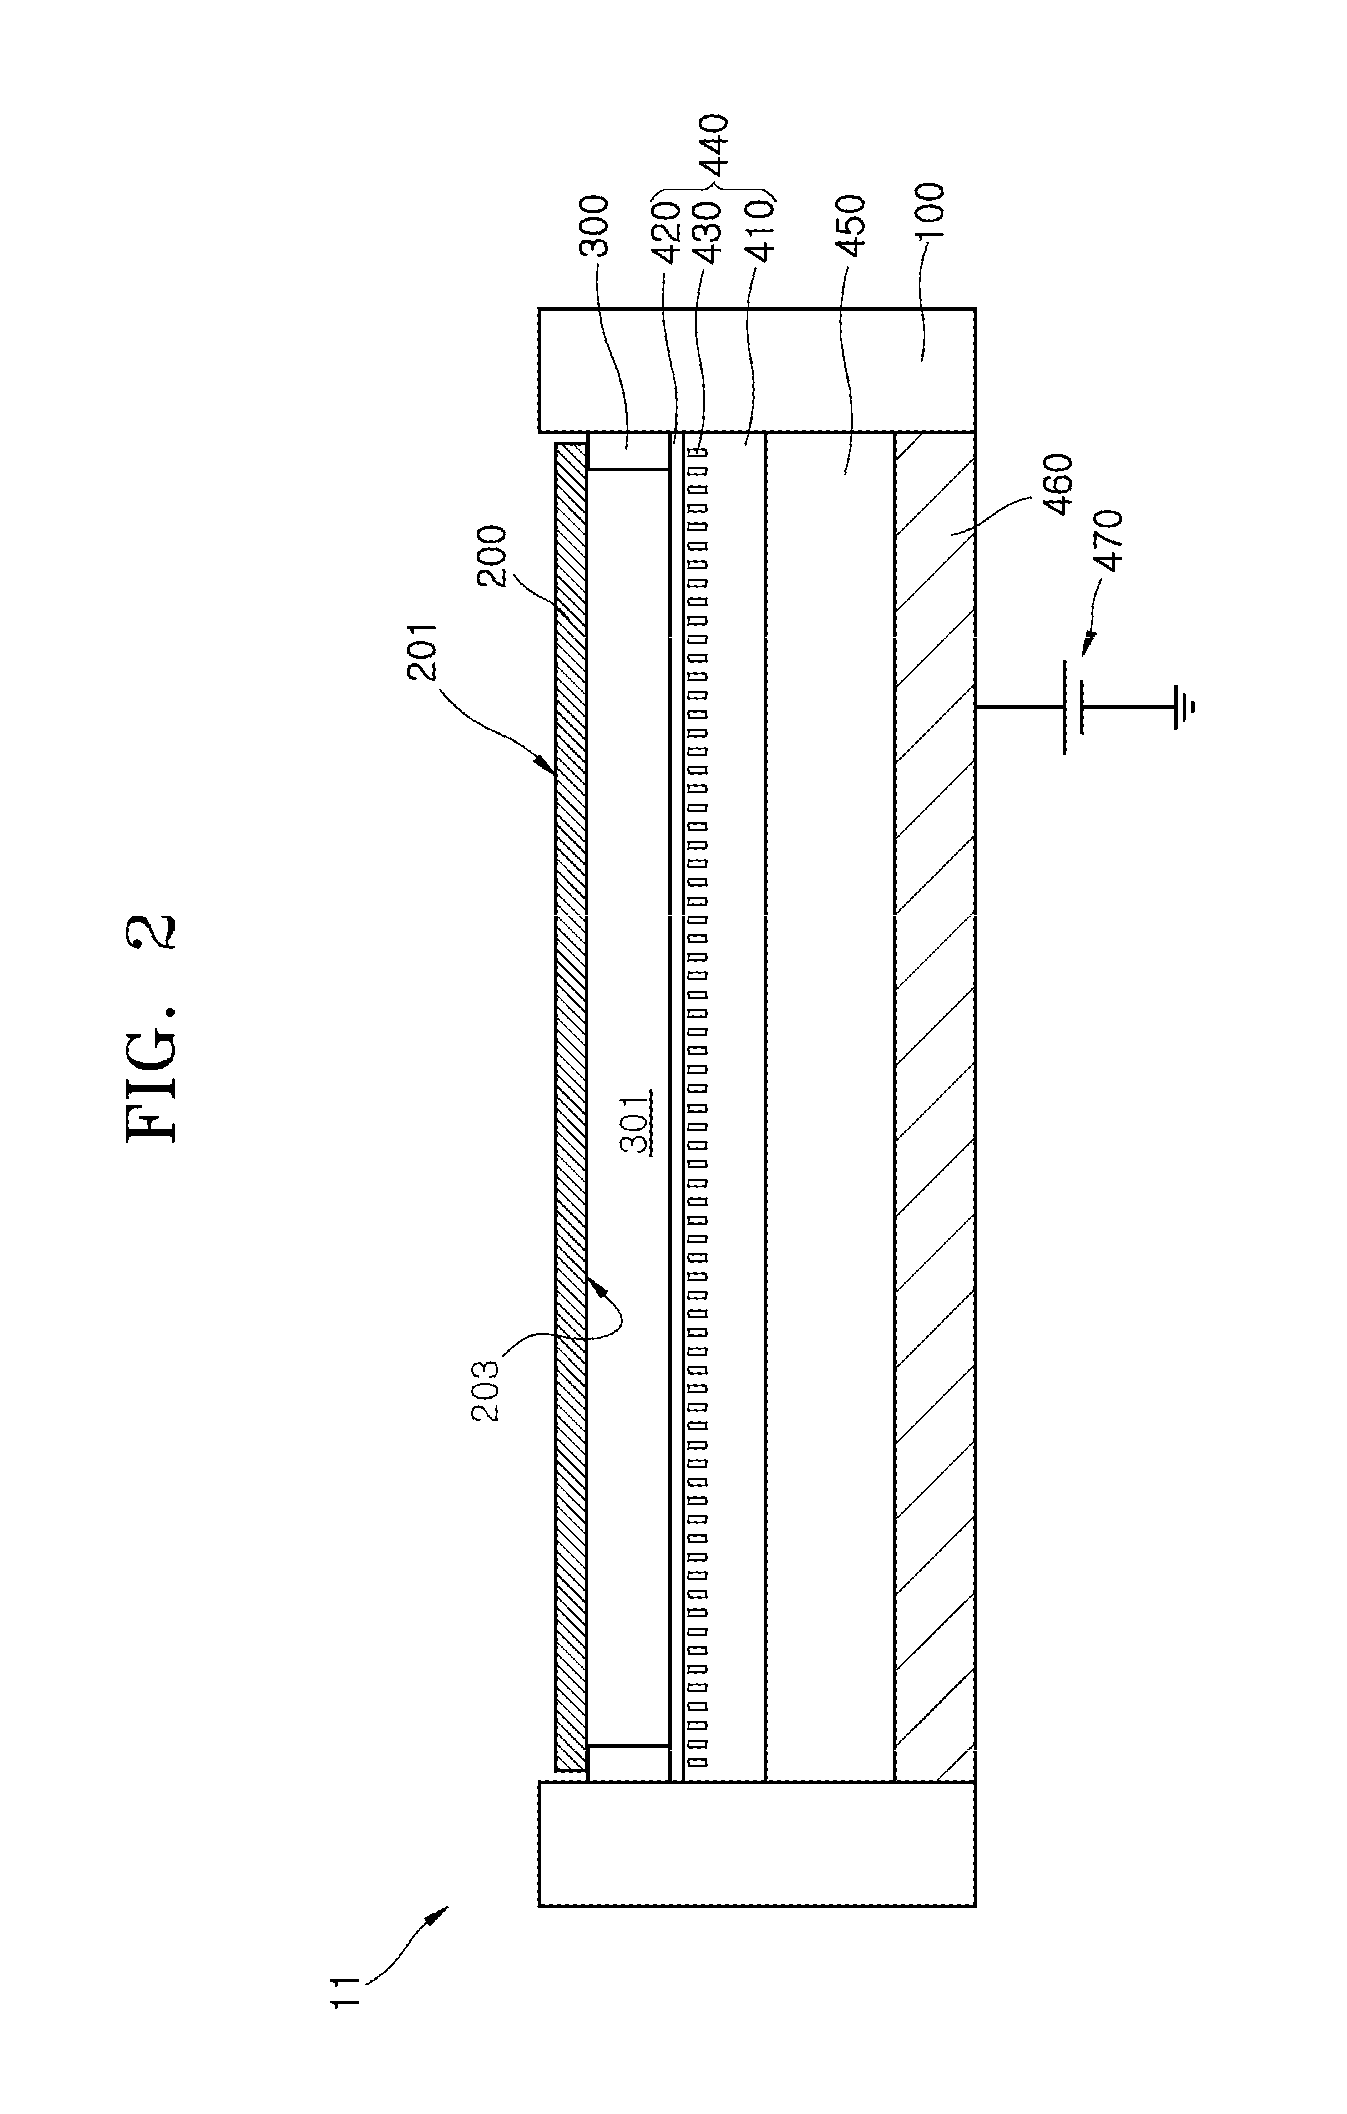 Apparatus and method for removing particles present on a wafer using photoelectrons and an electric field